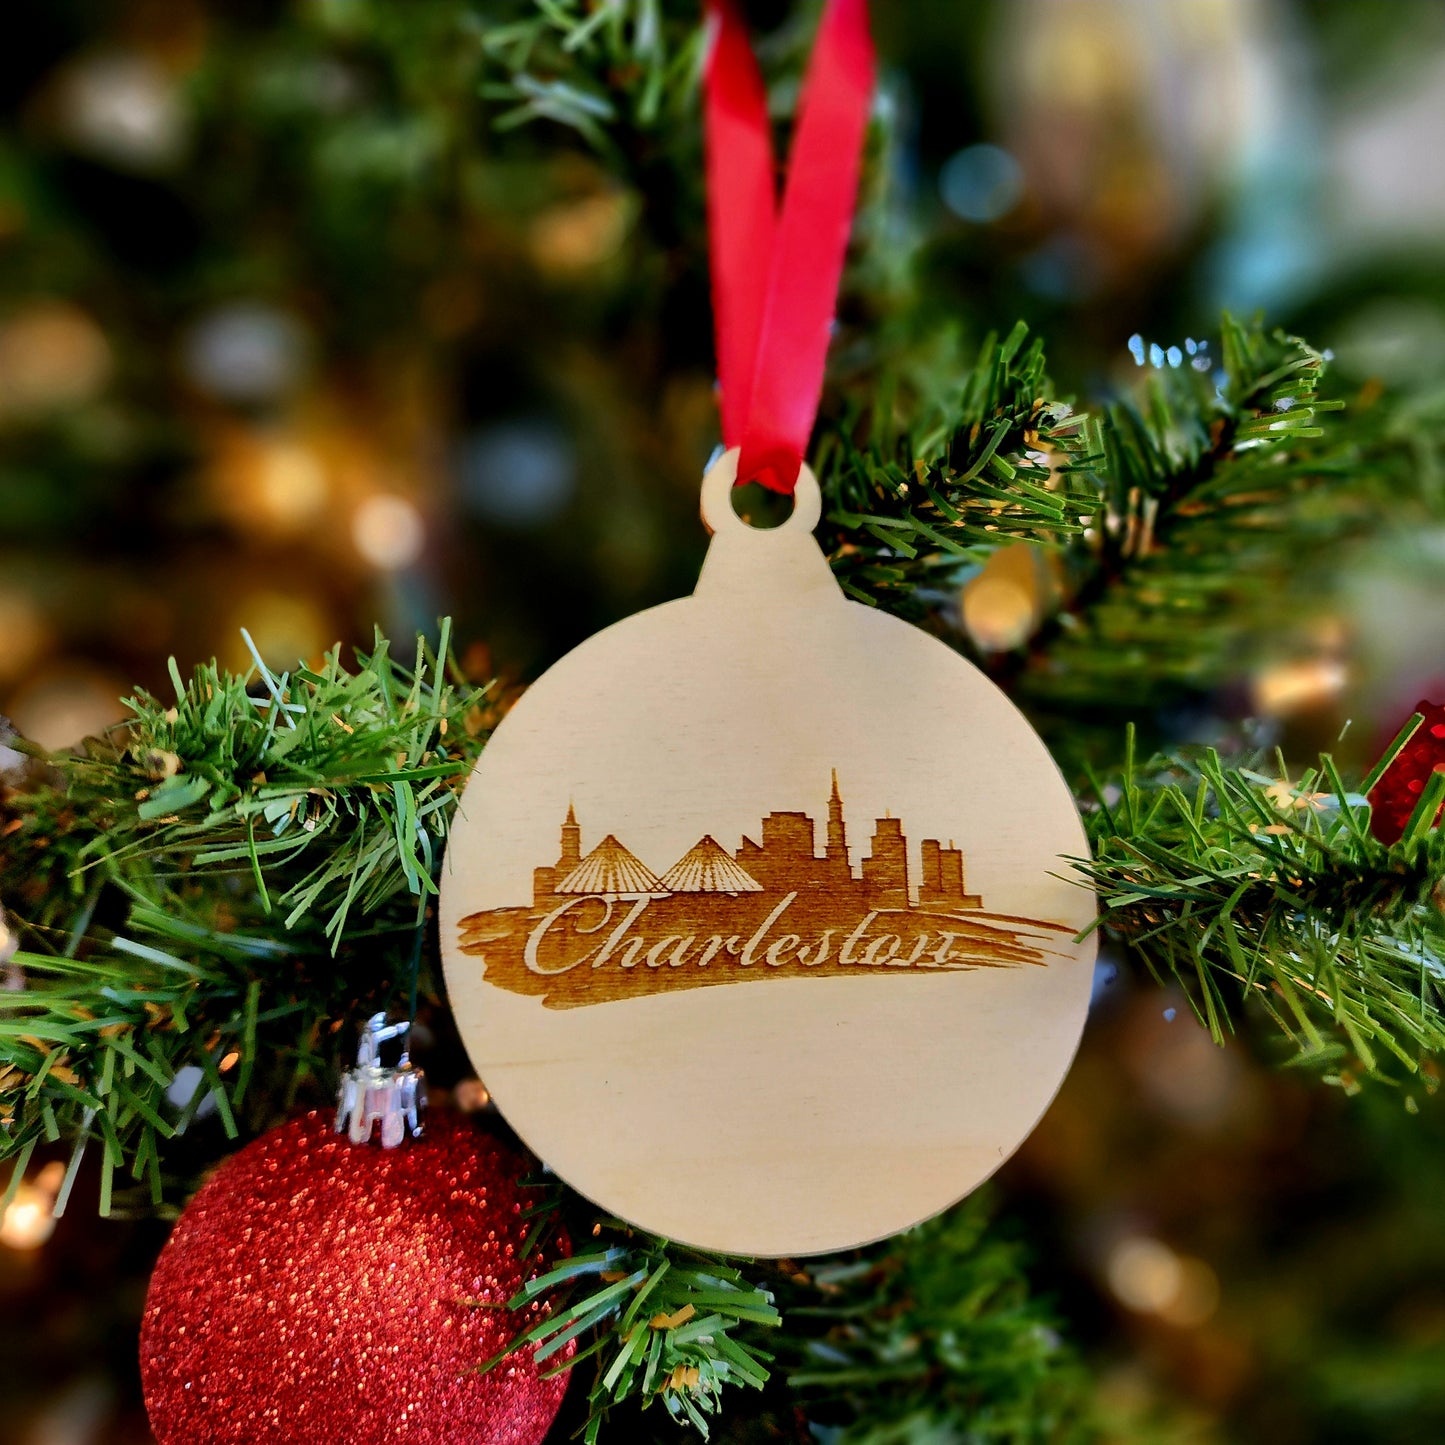 Wooden Laser Engraved Christmas Ornaments